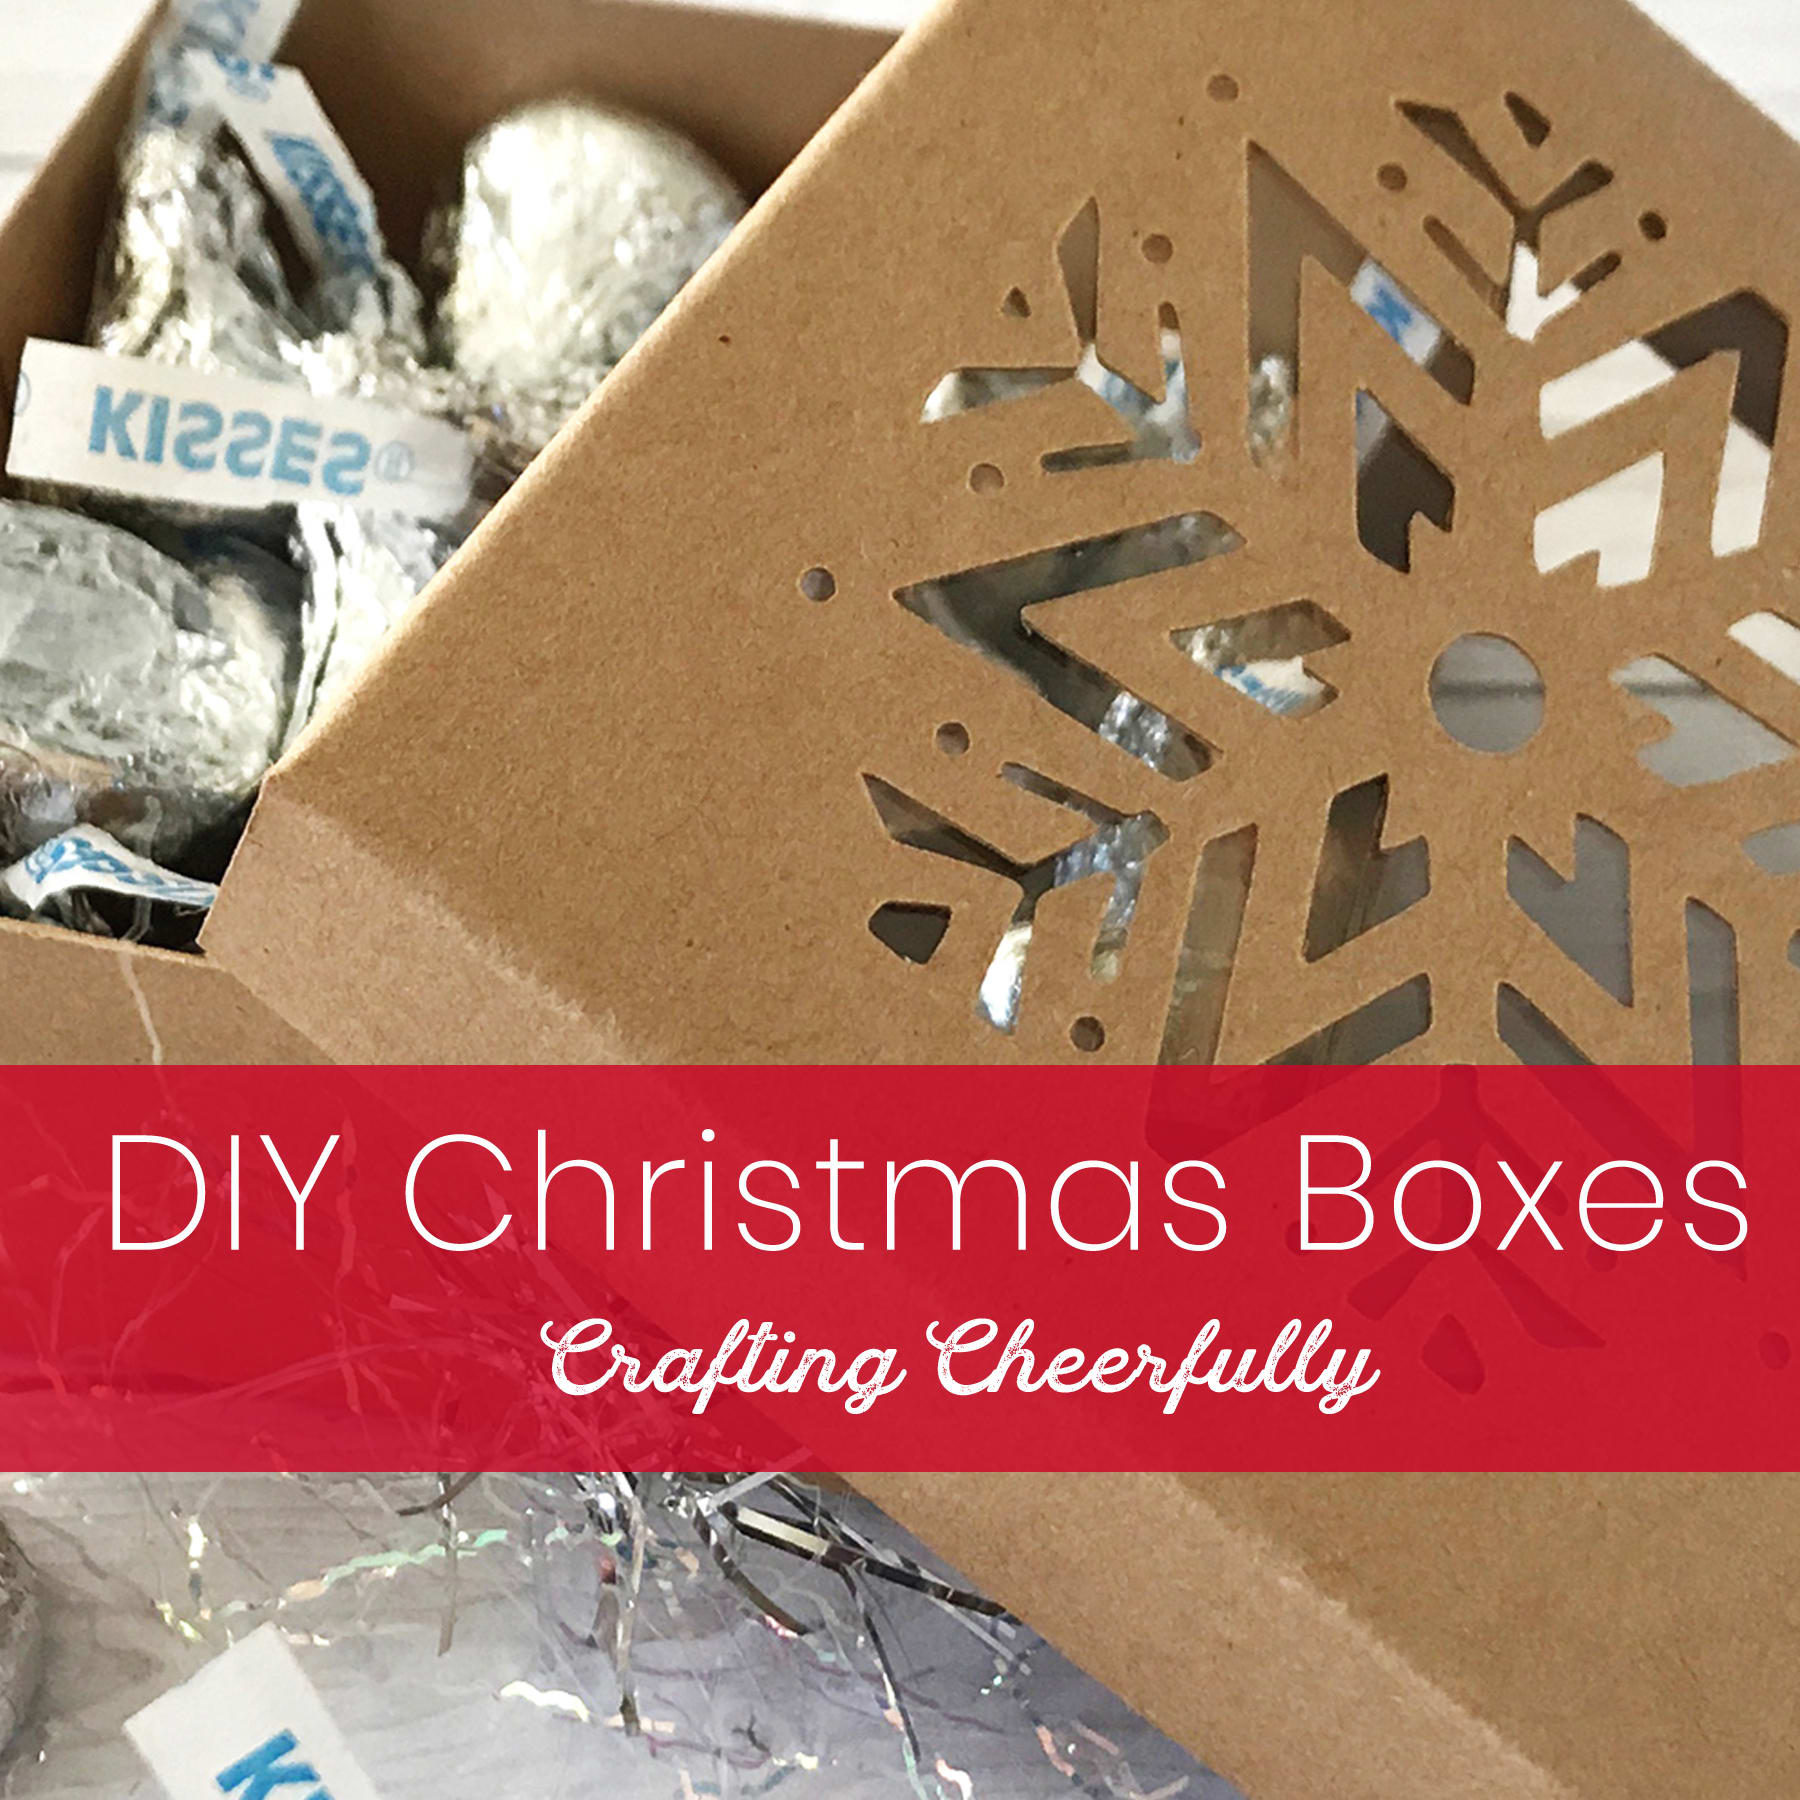 Little House Gift Boxes – Free Cut Files